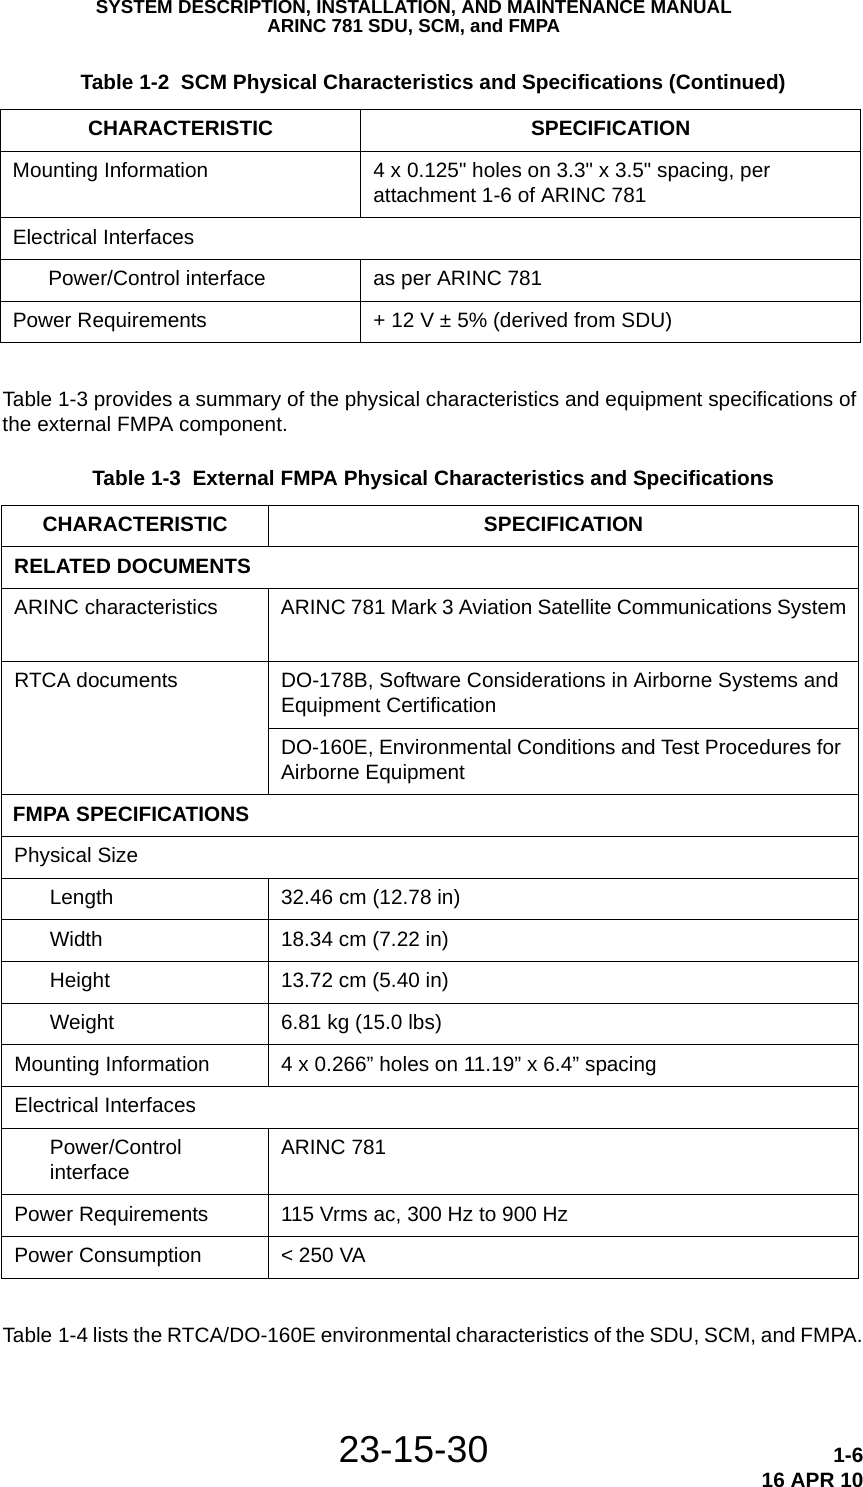 SYSTEM DESCRIPTION, INSTALLATION, AND MAINTENANCE MANUALARINC 781 SDU, SCM, and FMPA23-15-30 1-616 APR 10Table 1-3 provides a summary of the physical characteristics and equipment specifications of the external FMPA component. Table 1-3  External FMPA Physical Characteristics and Specifications CHARACTERISTIC SPECIFICATIONRELATED DOCUMENTSARINC characteristics ARINC 781 Mark 3 Aviation Satellite Communications SystemRTCA documents DO-178B, Software Considerations in Airborne Systems and Equipment CertificationDO-160E, Environmental Conditions and Test Procedures for Airborne EquipmentFMPA SPECIFICATIONSPhysical SizeLength 32.46 cm (12.78 in)Width 18.34 cm (7.22 in)Height 13.72 cm (5.40 in)Weight 6.81 kg (15.0 lbs)Mounting Information 4 x 0.266” holes on 11.19” x 6.4” spacingElectrical InterfacesPower/Control interface ARINC 781Power Requirements 115 Vrms ac, 300 Hz to 900 HzPower Consumption &lt; 250 VATable 1-4 lists the RTCA/DO-160E environmental characteristics of the SDU, SCM, and FMPA.Mounting Information 4 x 0.125&quot; holes on 3.3&quot; x 3.5&quot; spacing, per attachment 1-6 of ARINC 781Electrical InterfacesPower/Control interface as per ARINC 781Power Requirements + 12 V ± 5% (derived from SDU) Table 1-2  SCM Physical Characteristics and Specifications (Continued)CHARACTERISTIC SPECIFICATION